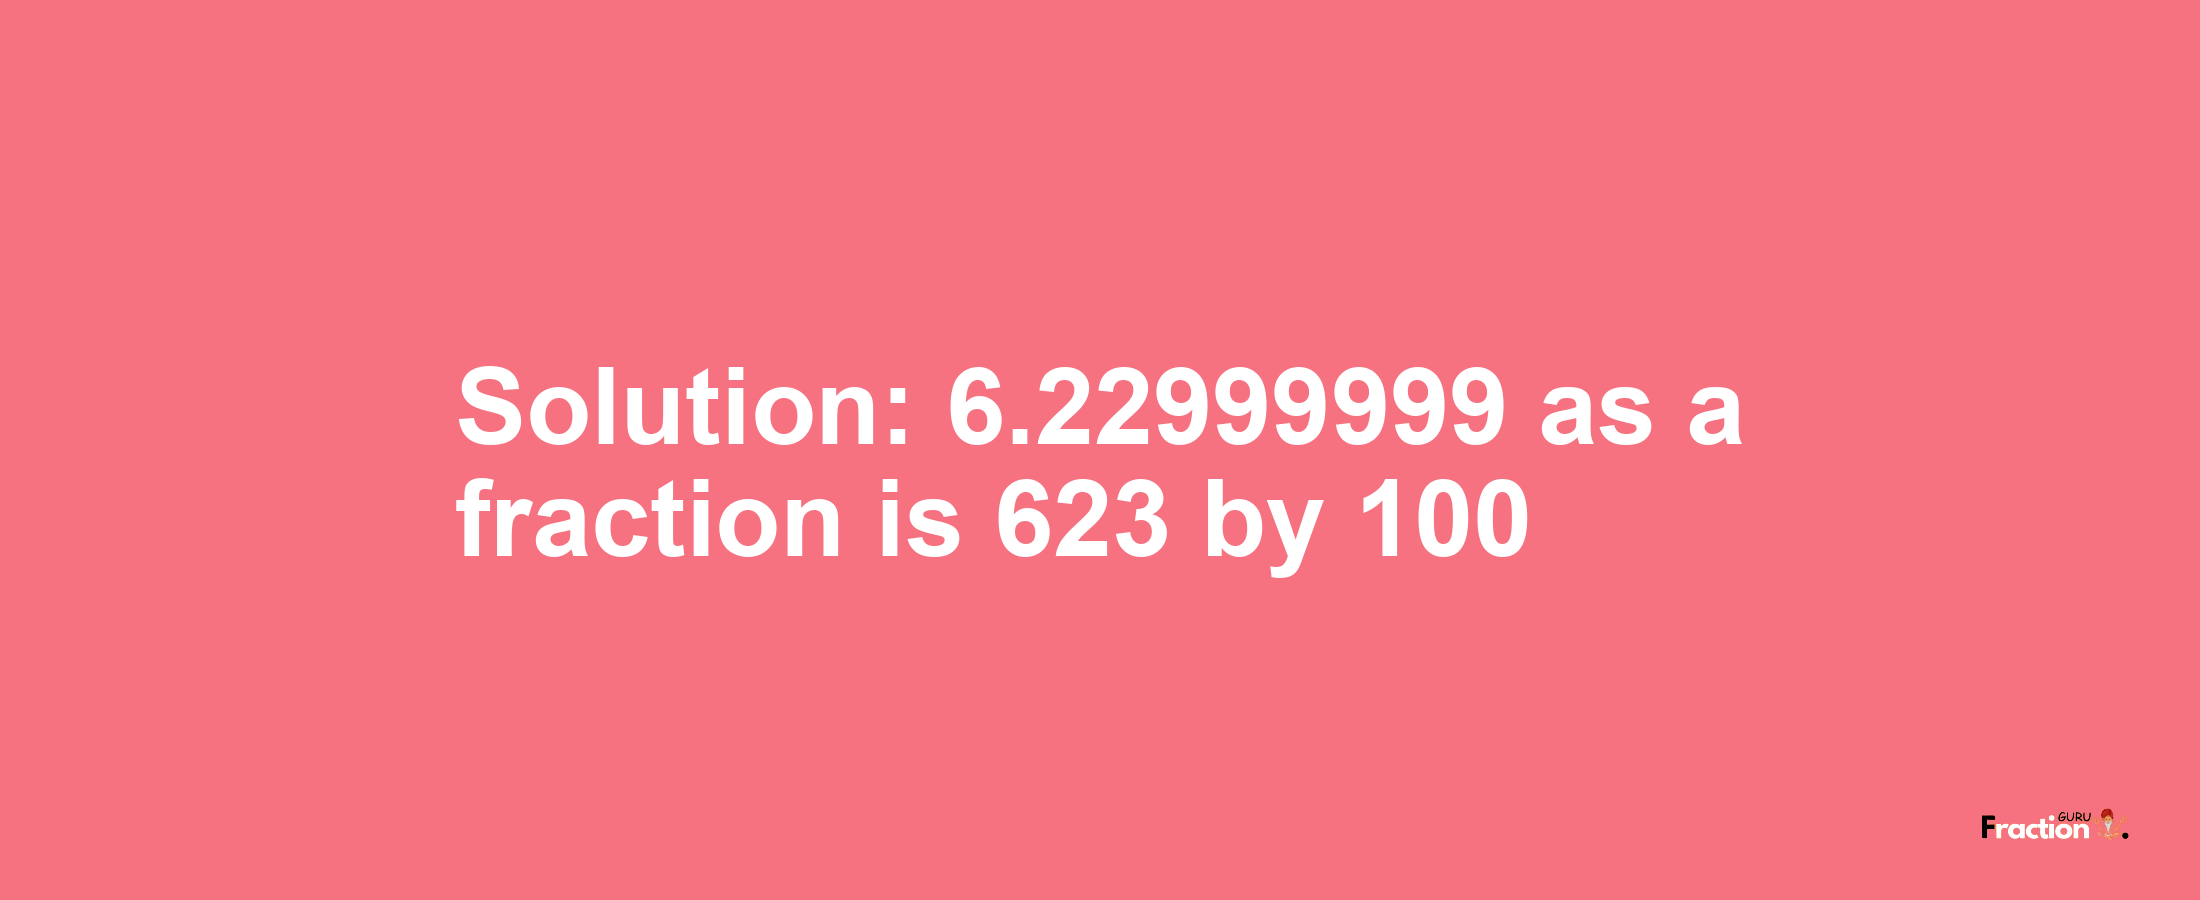 Solution:6.22999999 as a fraction is 623/100